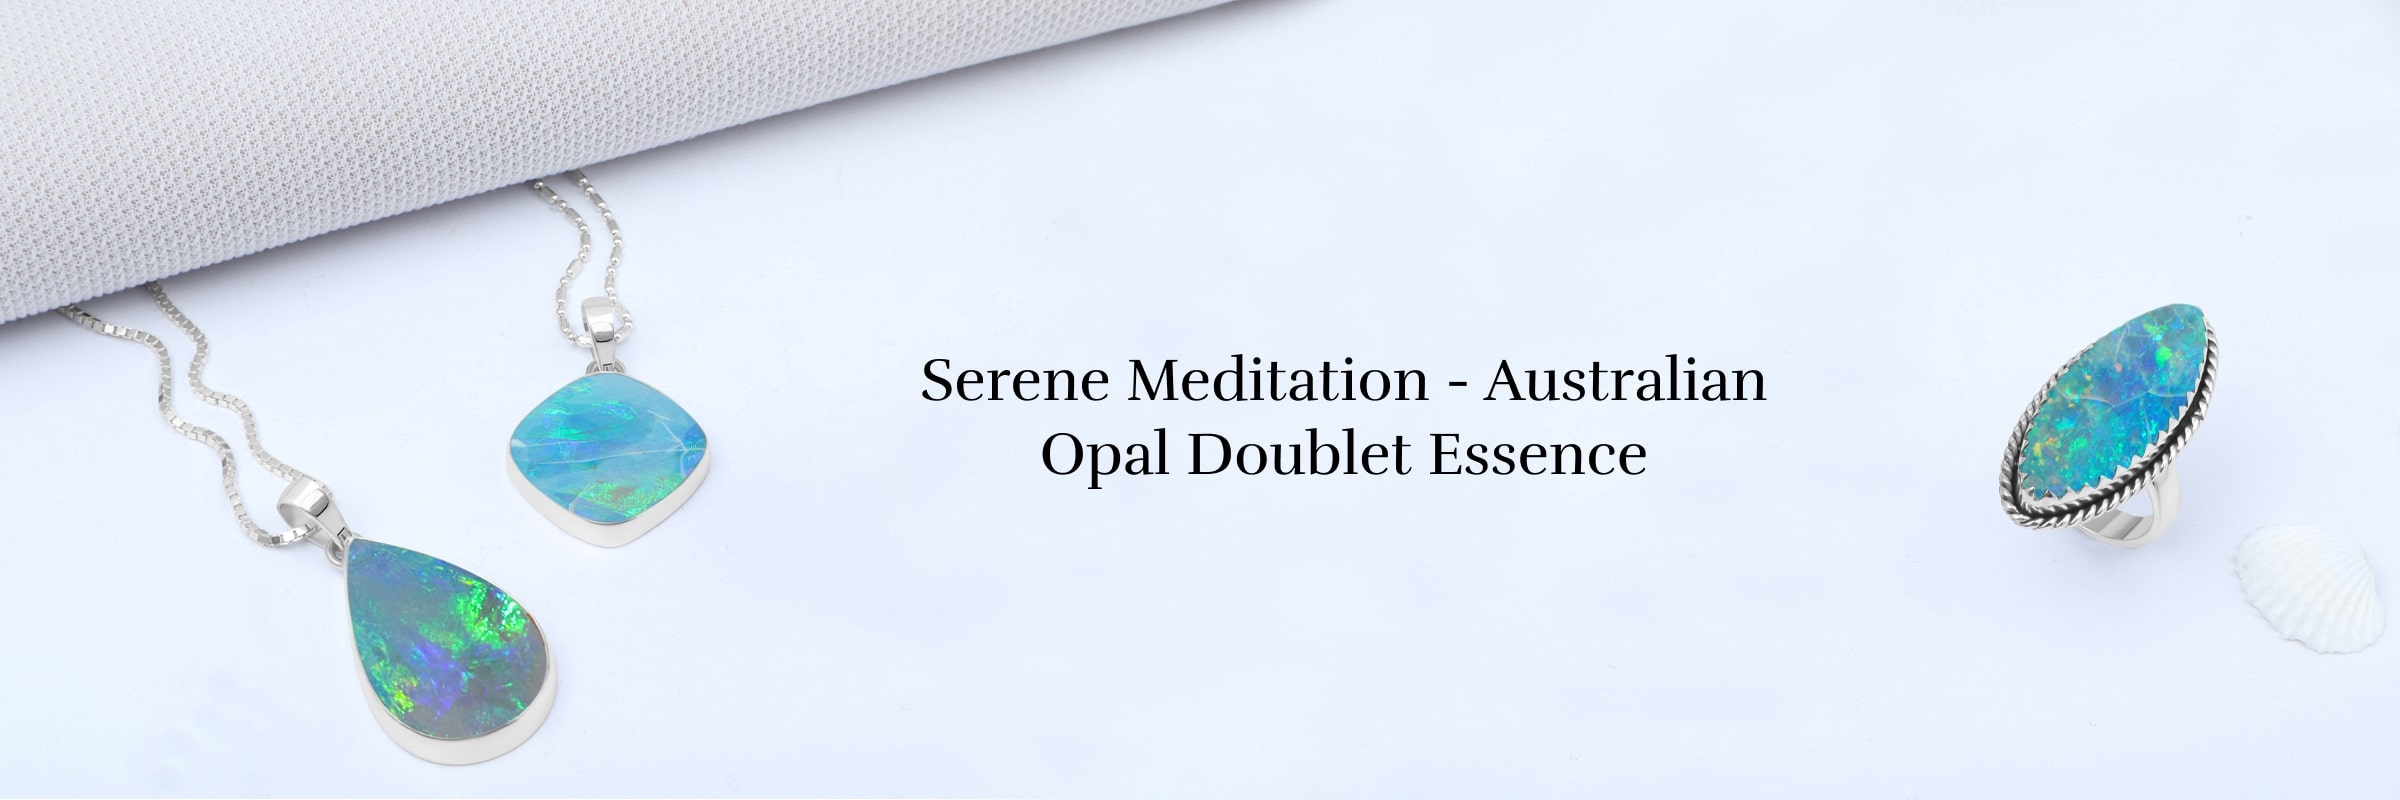 Meditation with the Australian Opal Doublet